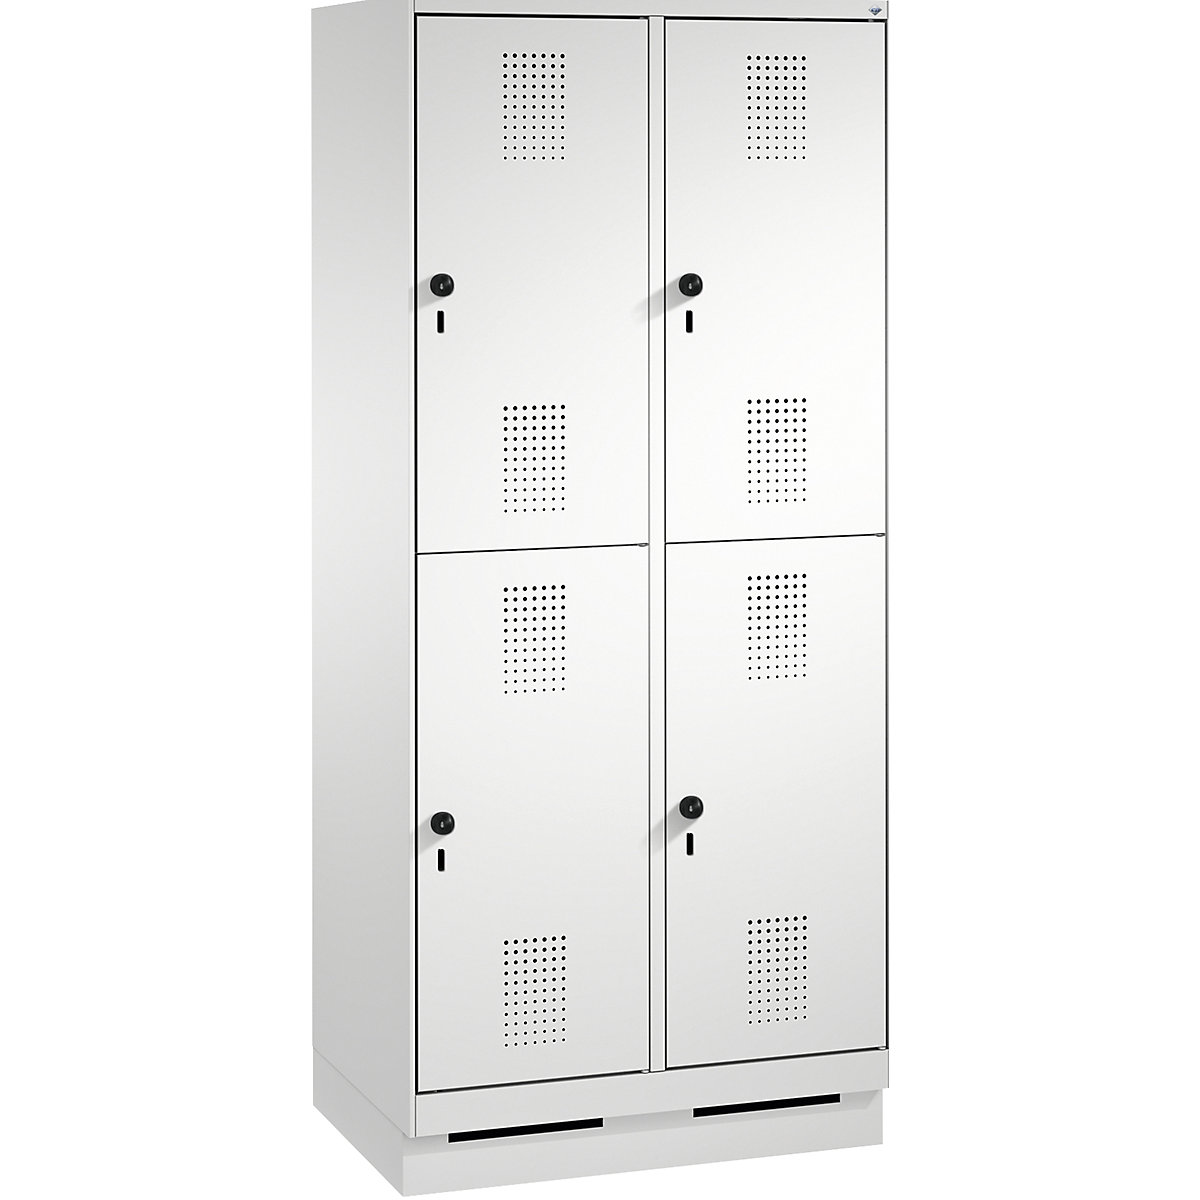 EVOLO cloakroom locker, double tier, with plinth – C+P, 2 compartments, 2 shelf compartments each, compartment width 400 mm, light grey-15